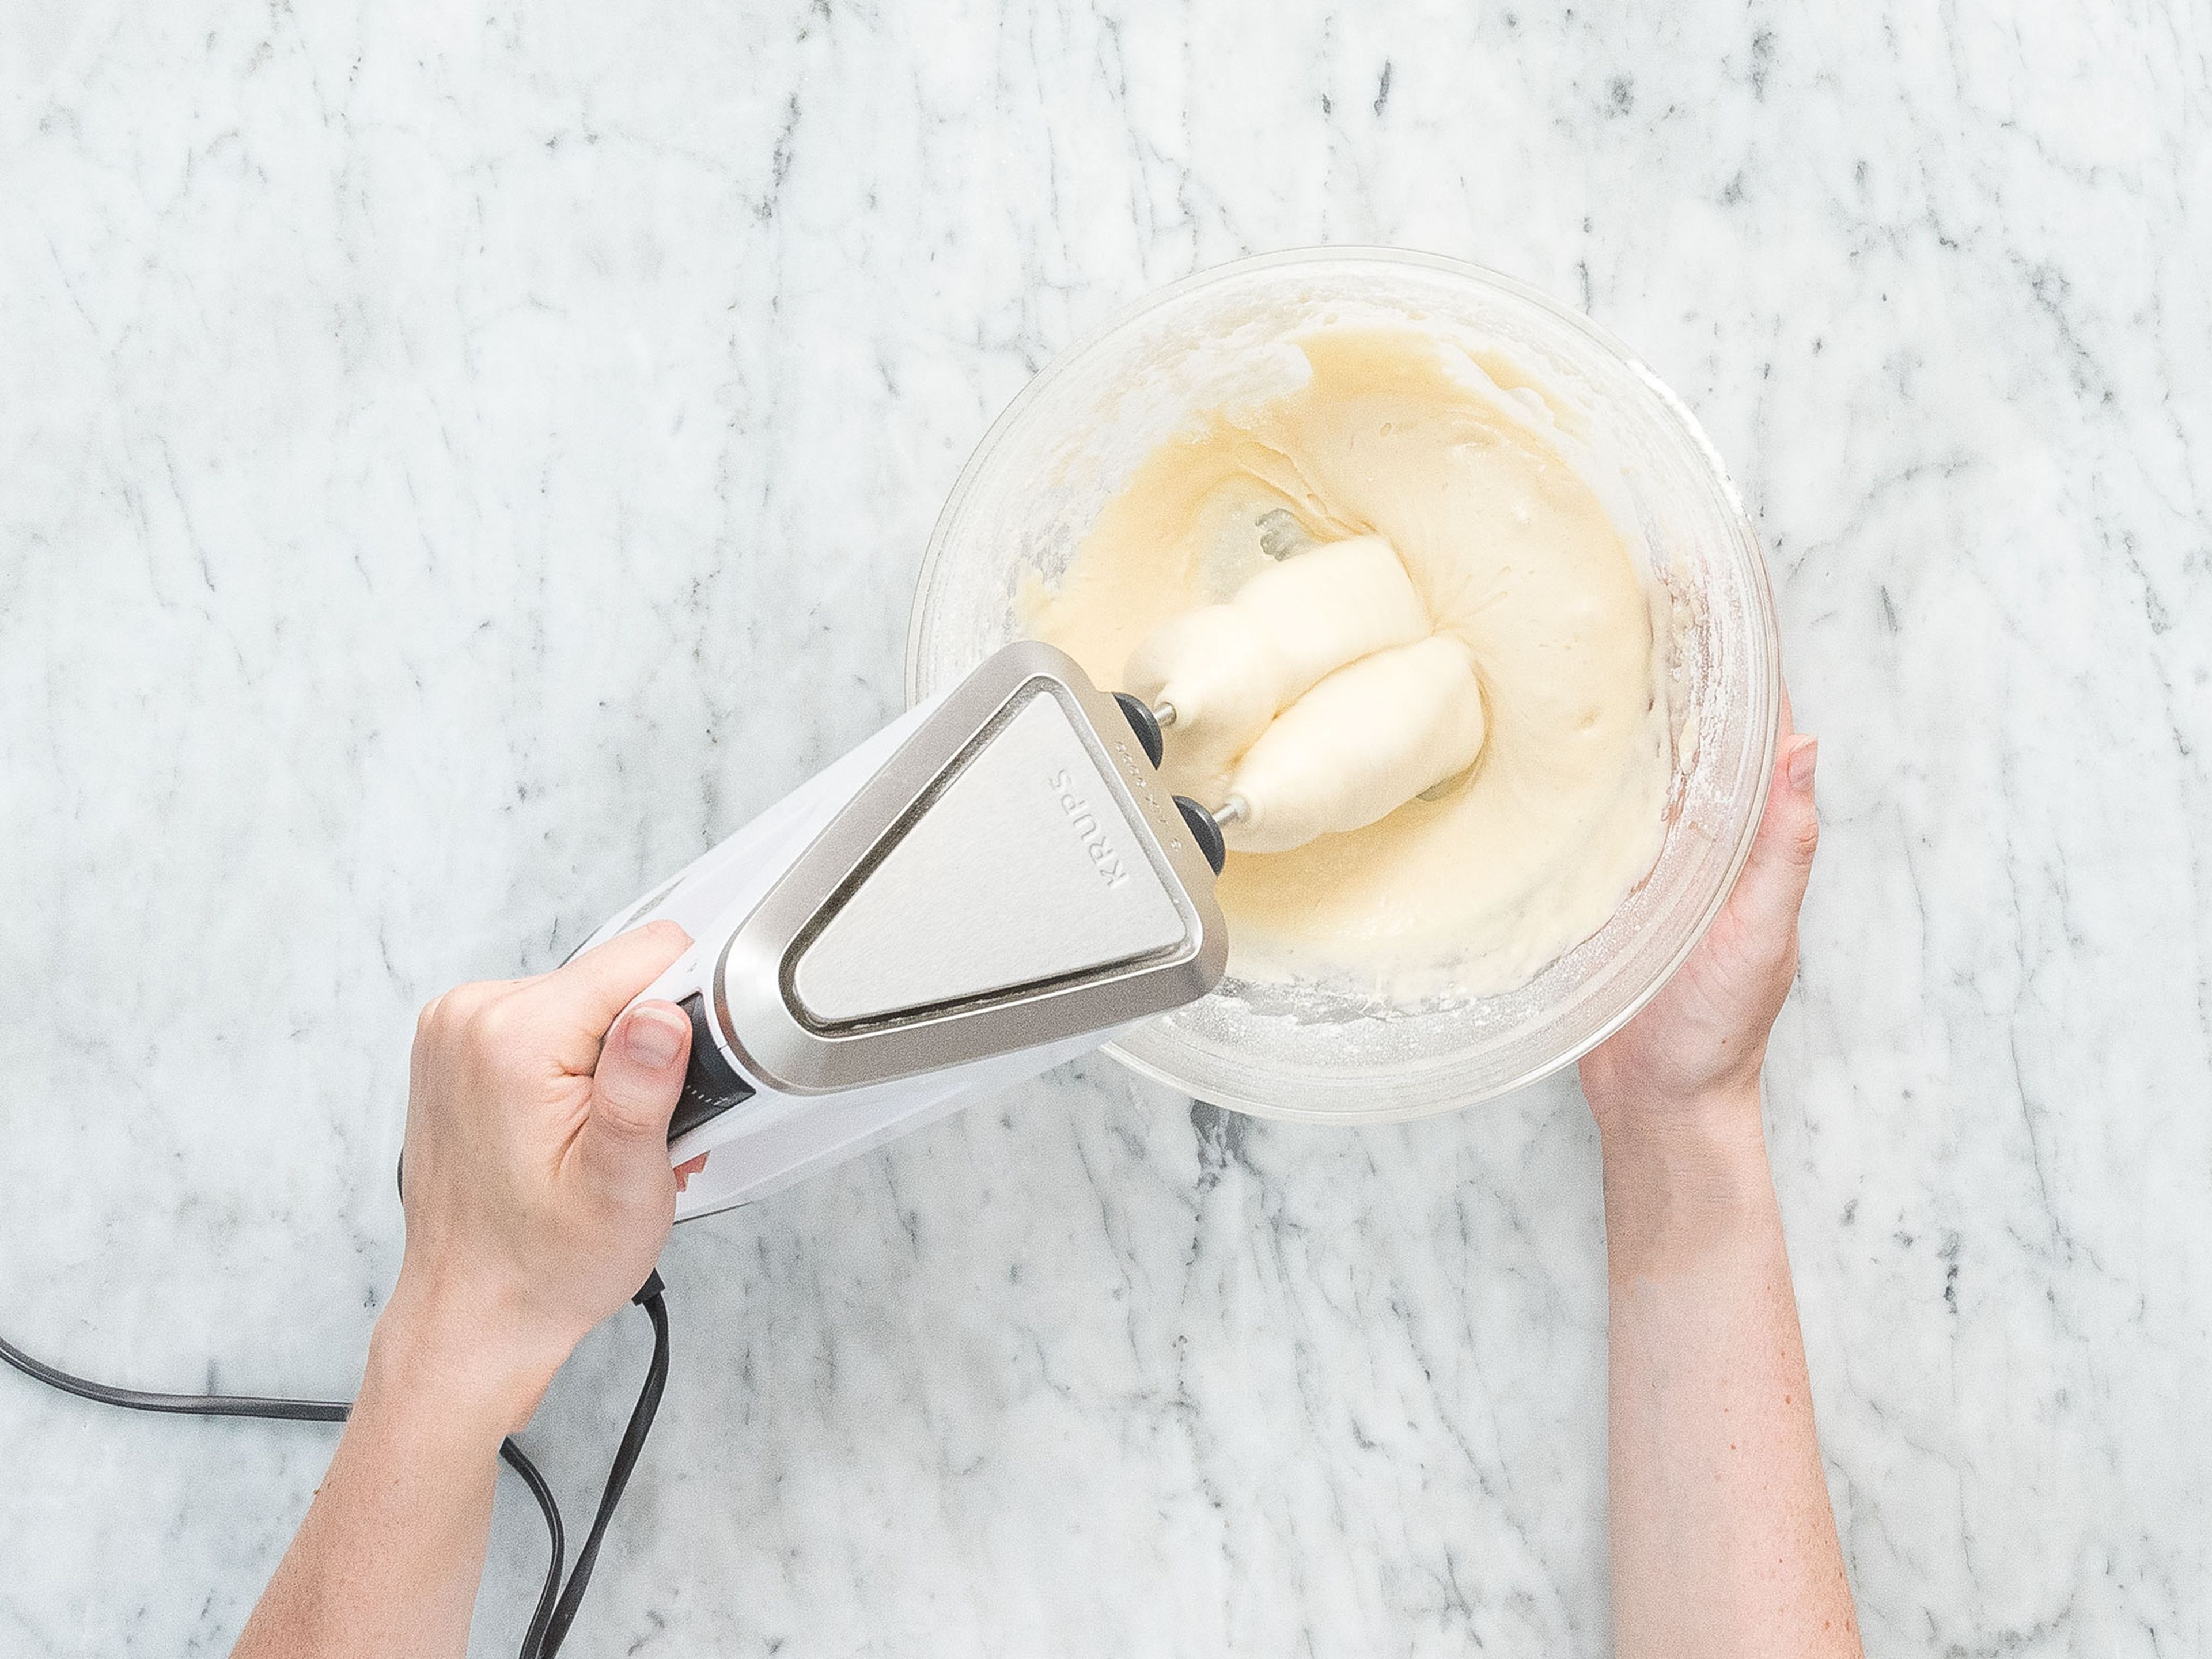 Add flour, baking powder, and baking soda to a bowl. Whisk to combine and set aside. Add eggs, sugar, vanilla sugar, salt, and buttermilk to a separate bowl. Using a hand mixer, beat until combined. Whisk in flour mixture and oil until a smooth batter forms.